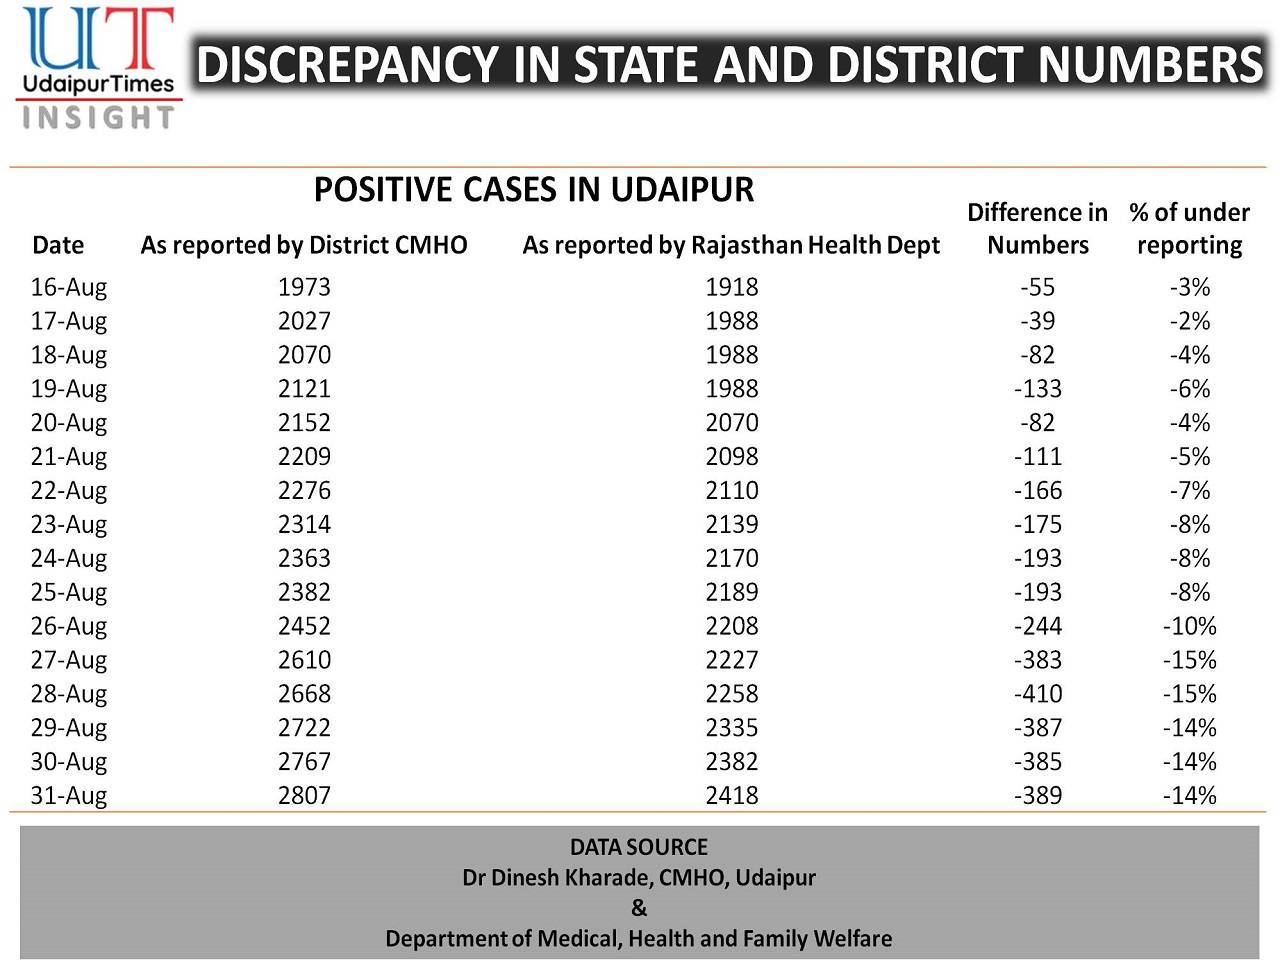 Discrepancy in reporting COVID positive at state level in Rajasthan - Udaipur under-reported by 15%